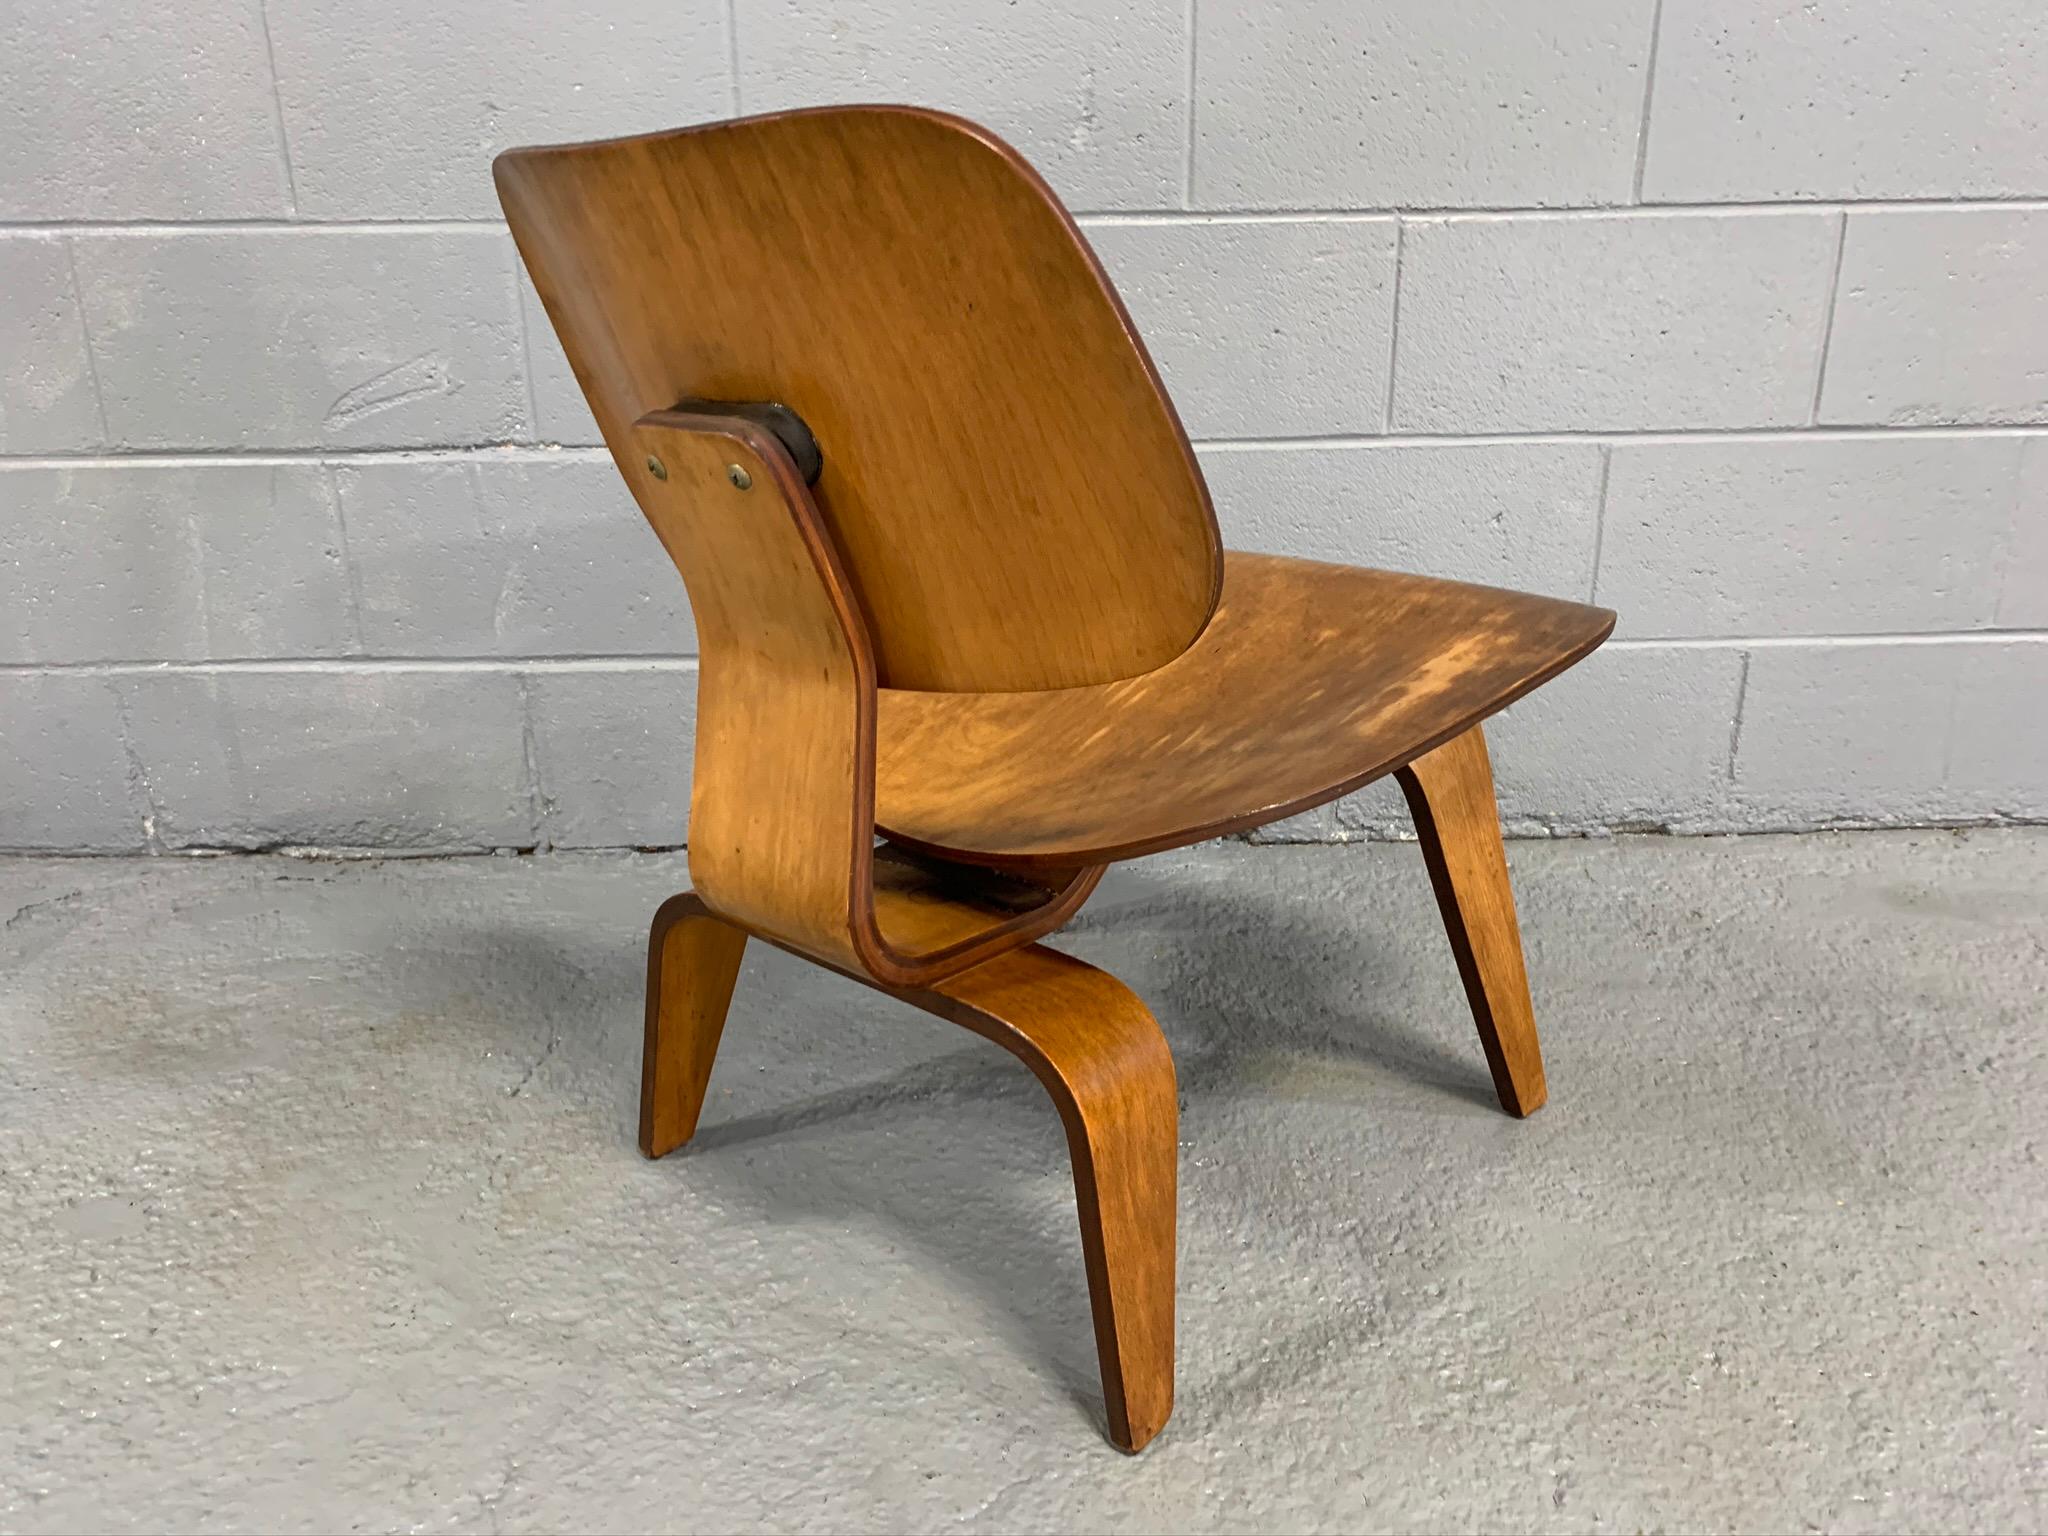 American Charles Eames LCW Midcentury Lounge Chair in Maple for Herman Miller